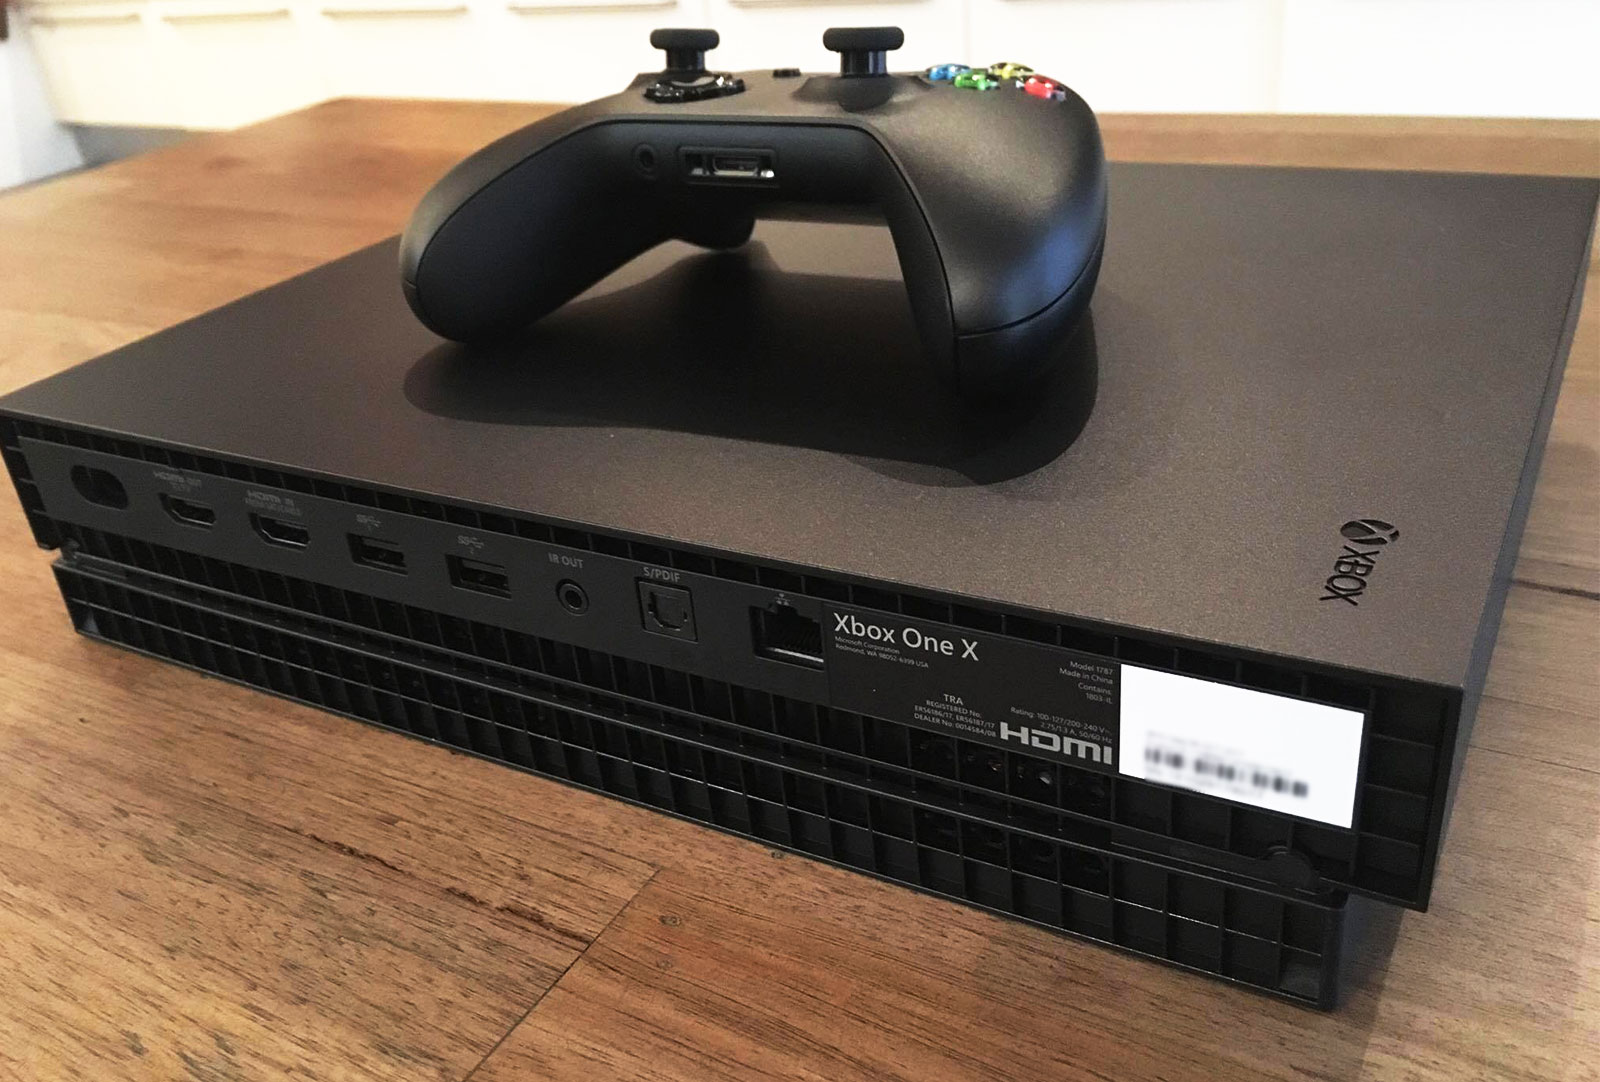 Microsoft’s Xbox One X arrives for an unboxing – Pickr
